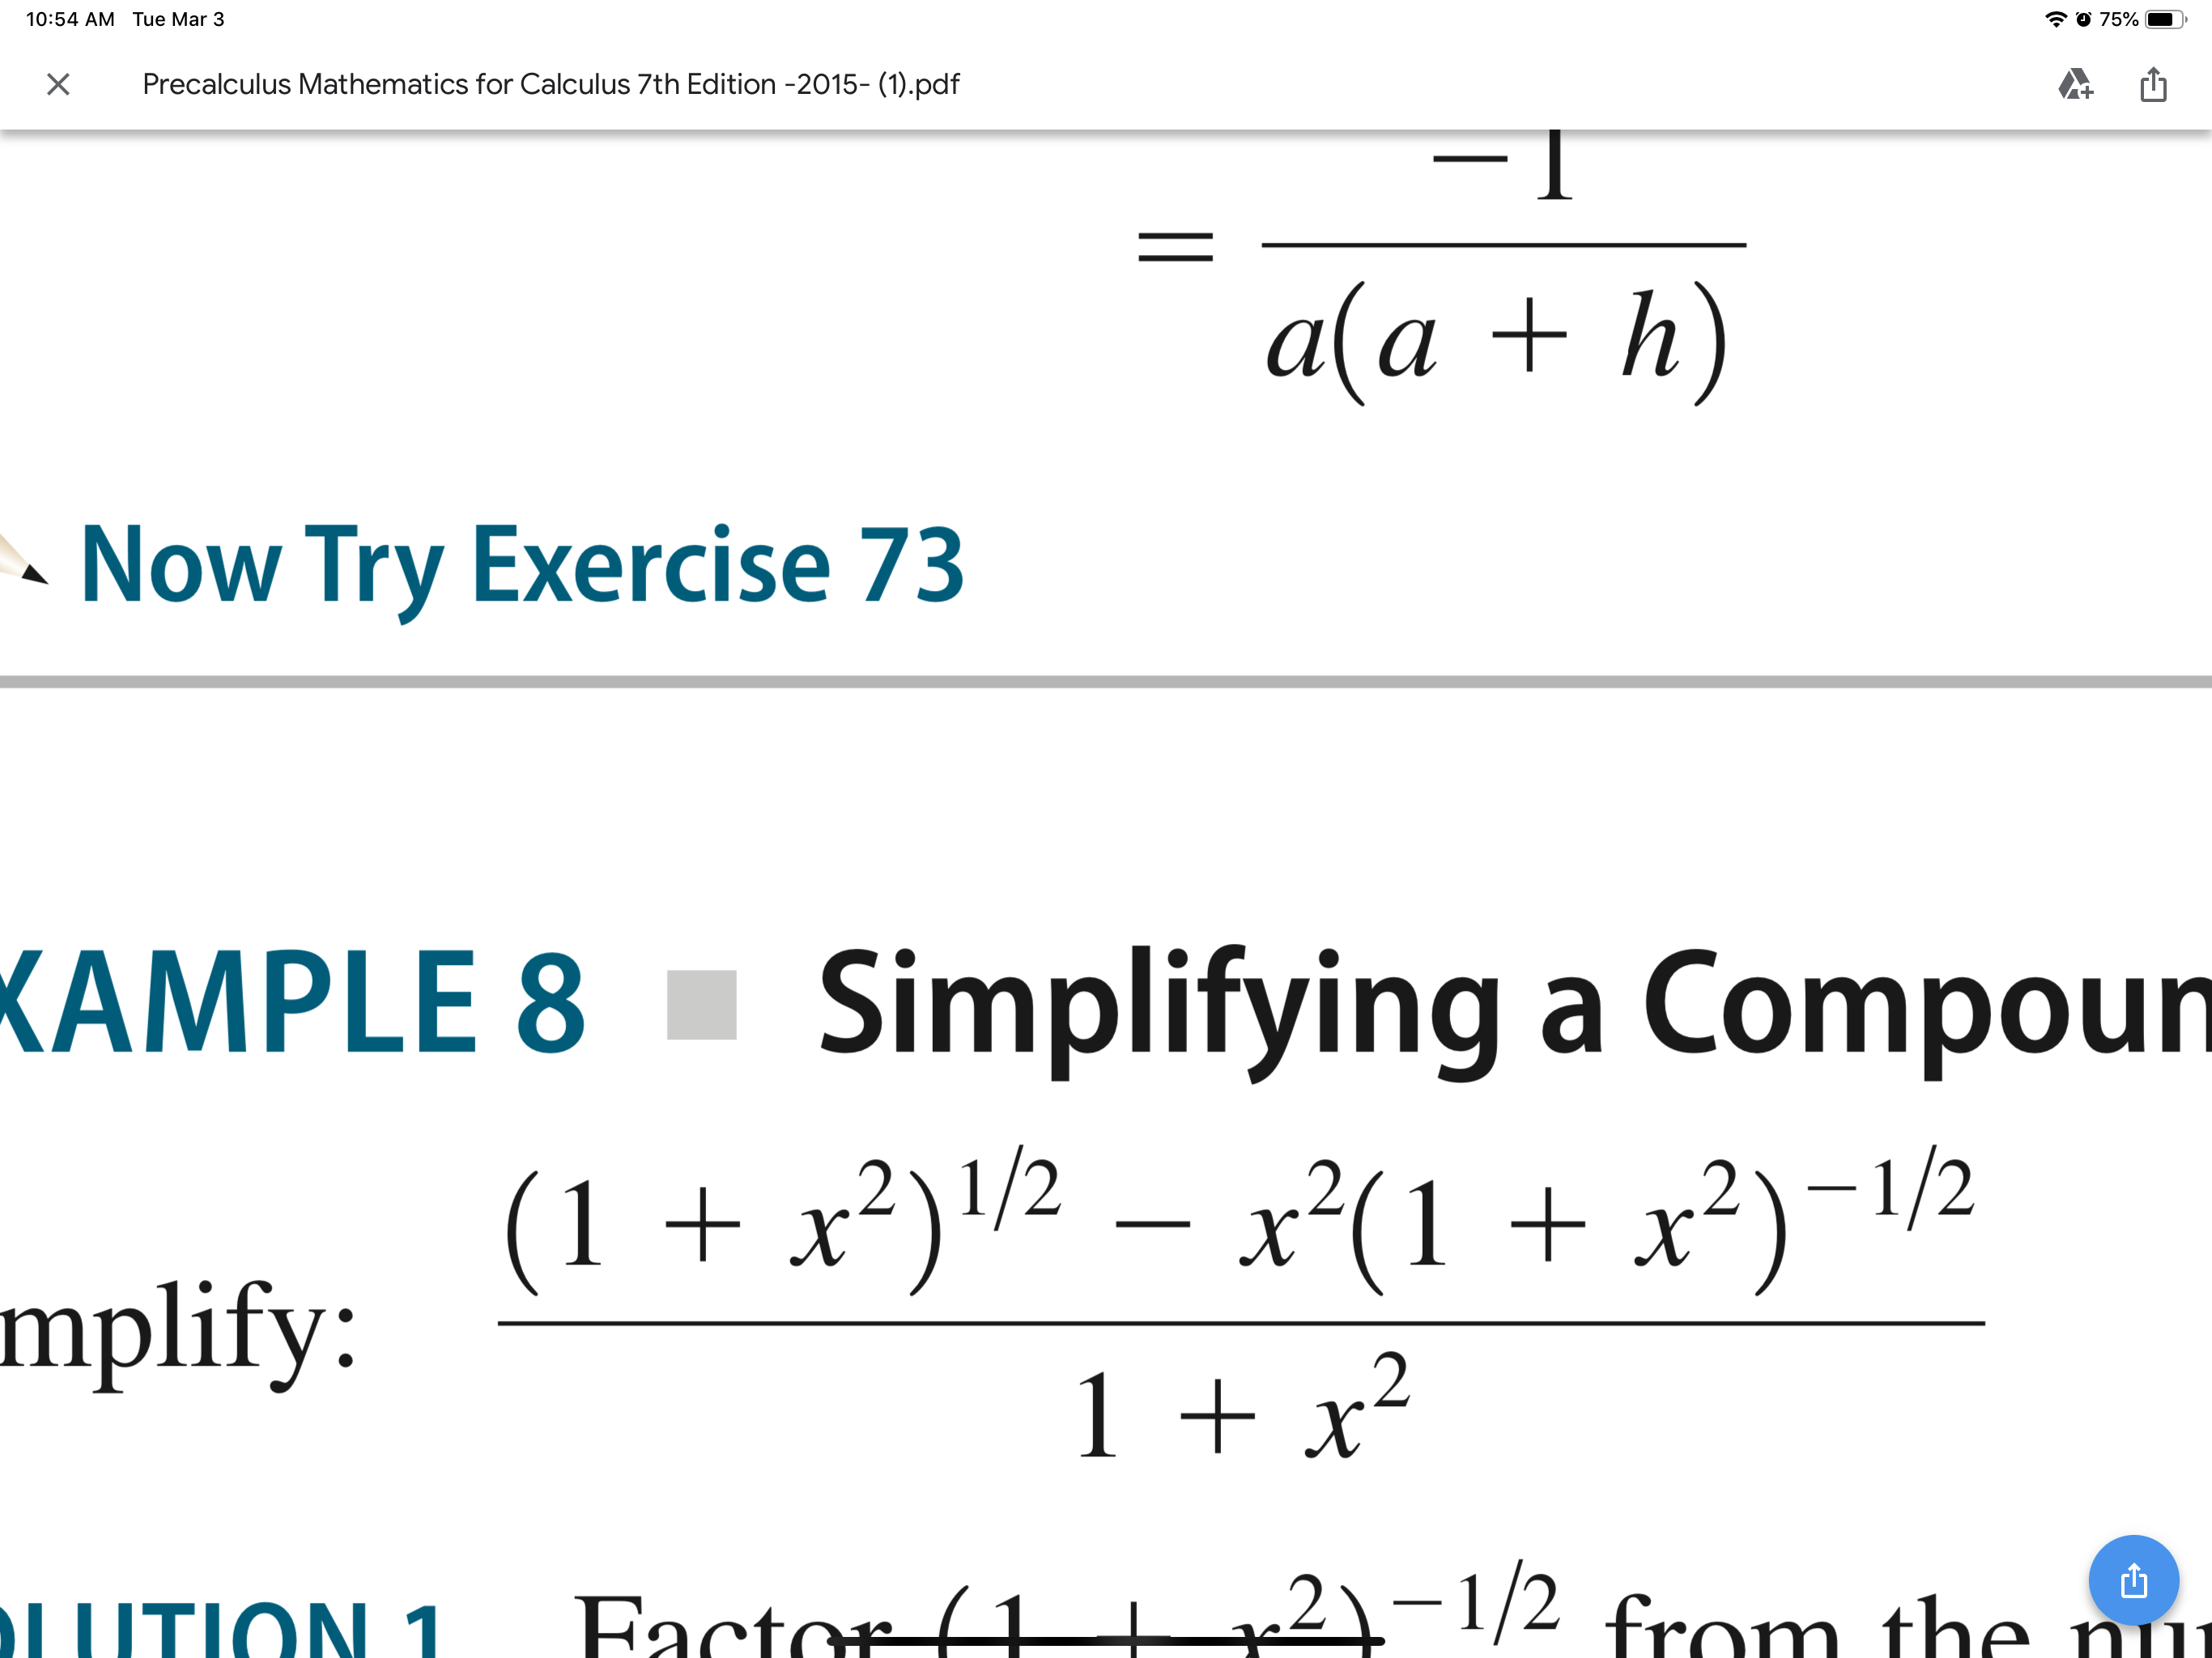 10:54 AM Tue Mar 3
75%
Precalculus Mathematics for Calculus 7th Edition -2015- (1).pdf
-1
a(a + h)
- Now Try Exercise 73
KAMPLE 8 - Simplifying a Compoun
(1 + x²)'/2 –
x²(1 + x²)¬/½
–1/2
mplify:
1 + x²
Factor (1
2)-1/2 from the nu
LUTION 1
